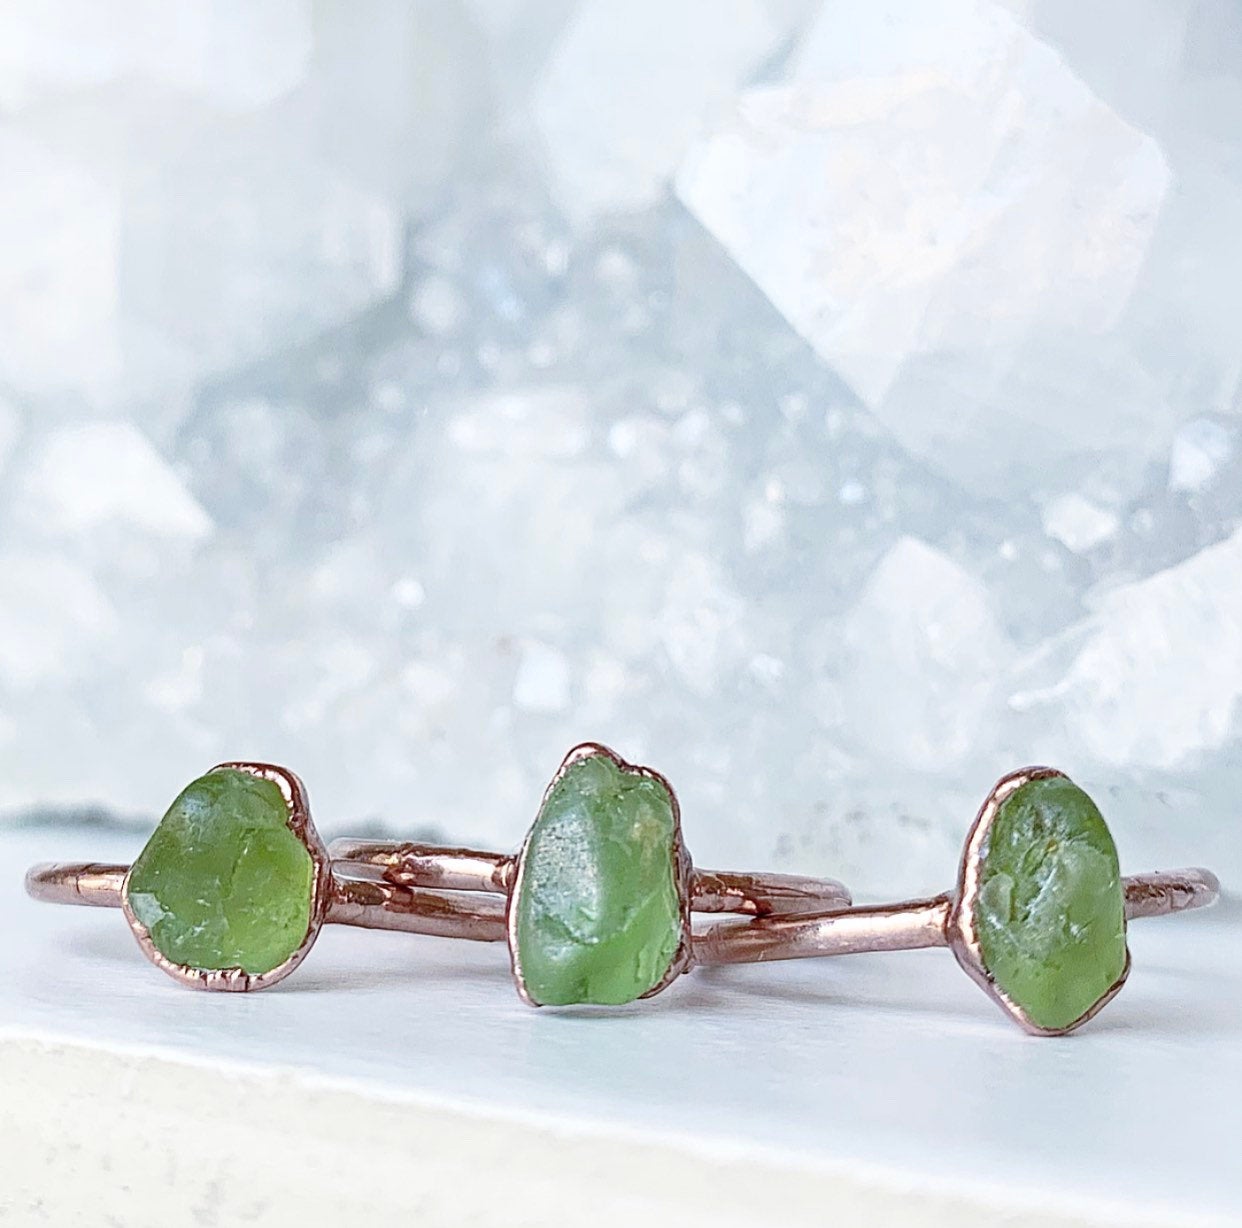 Raw Peridot Stacking Ring, August Birthstone Ring, Rough Stone Stacking Ring, August Birthstone Jewelry Gift, August Birthday Gift for Her